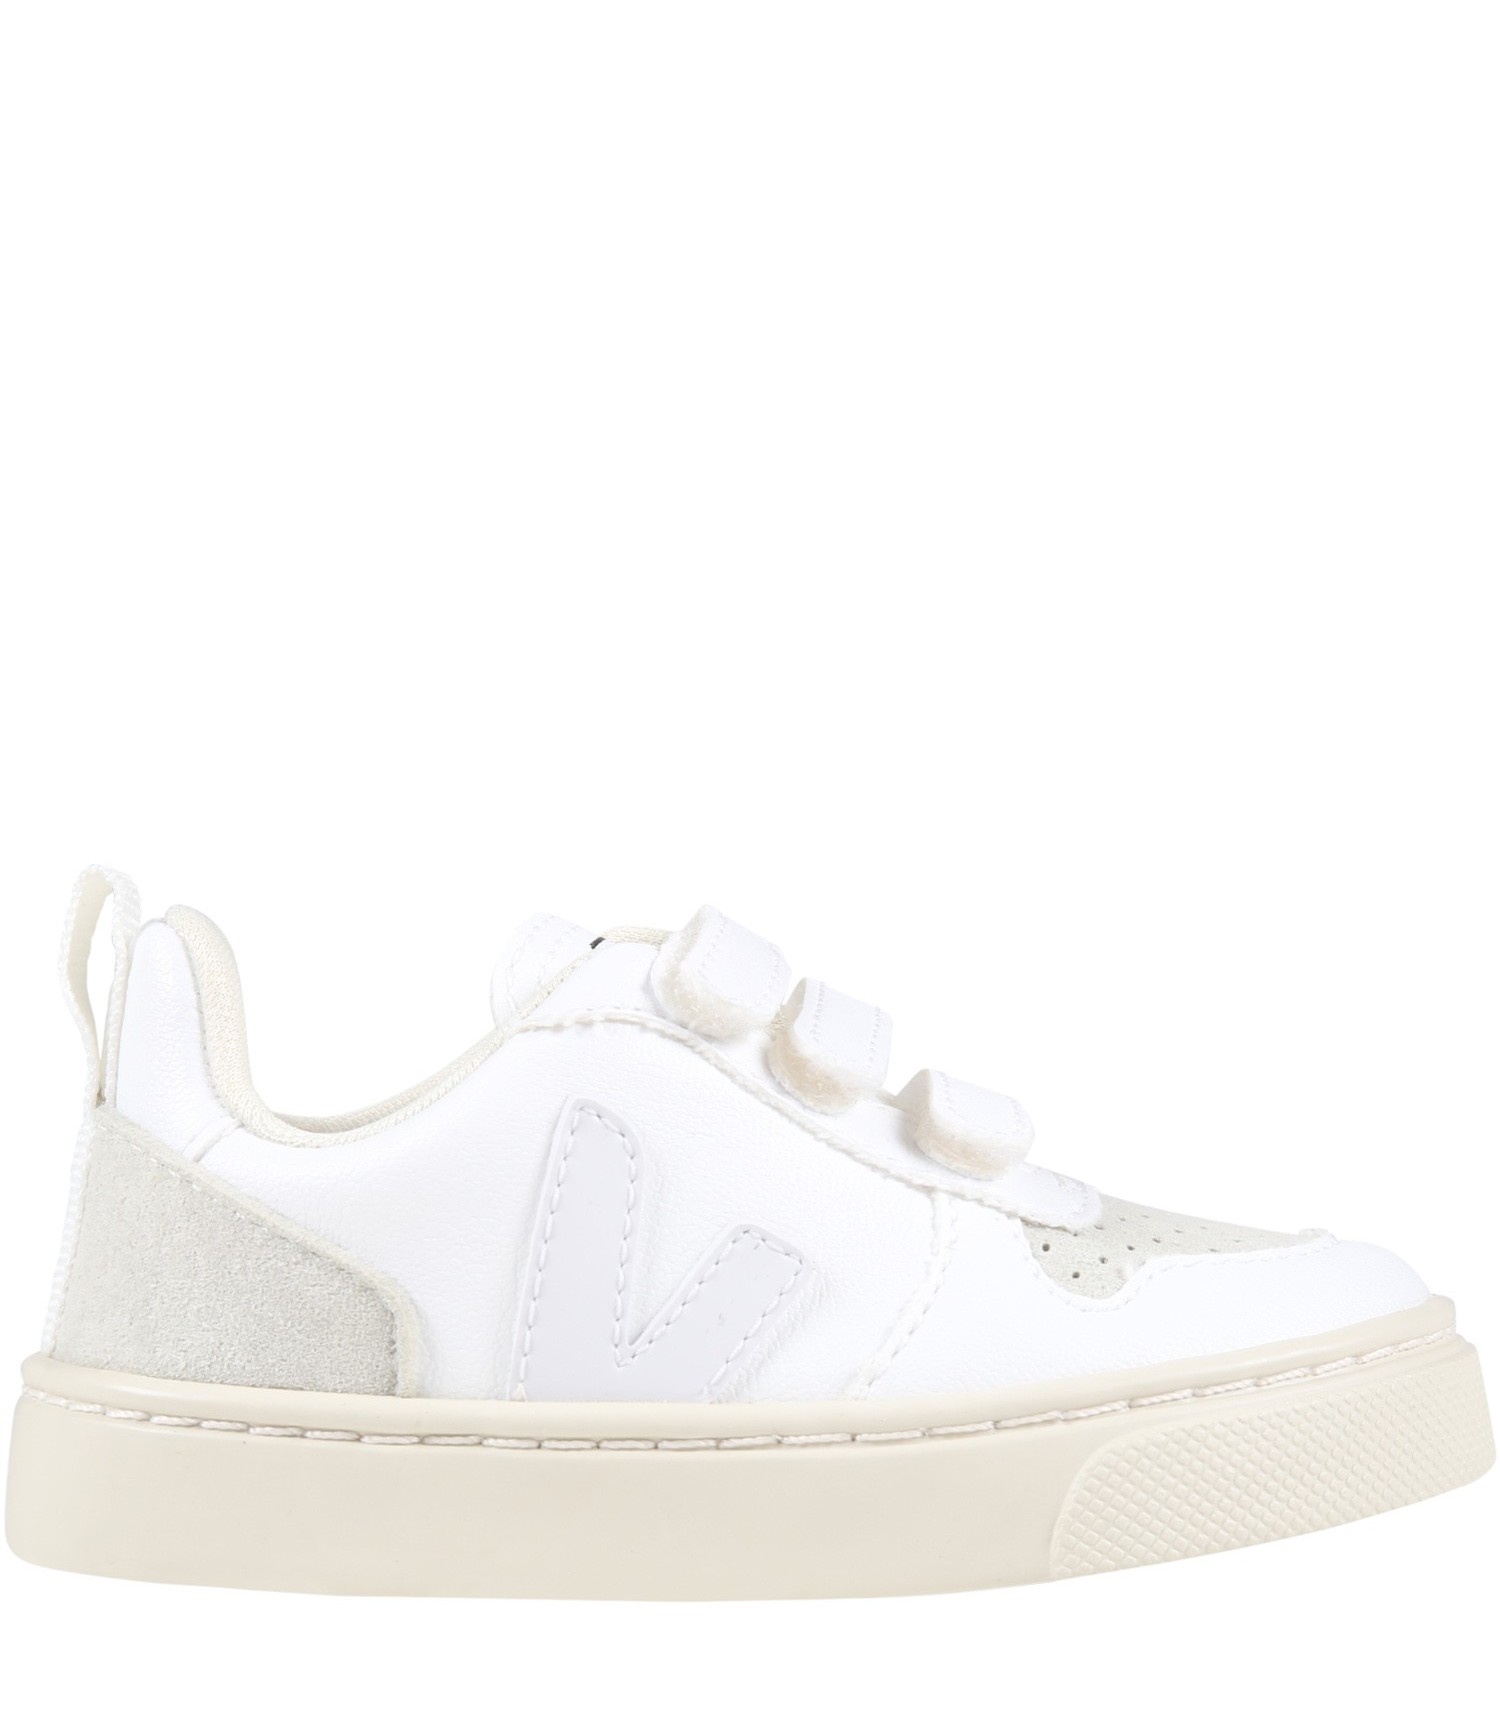 Veja White sneakers for kids with gray logo